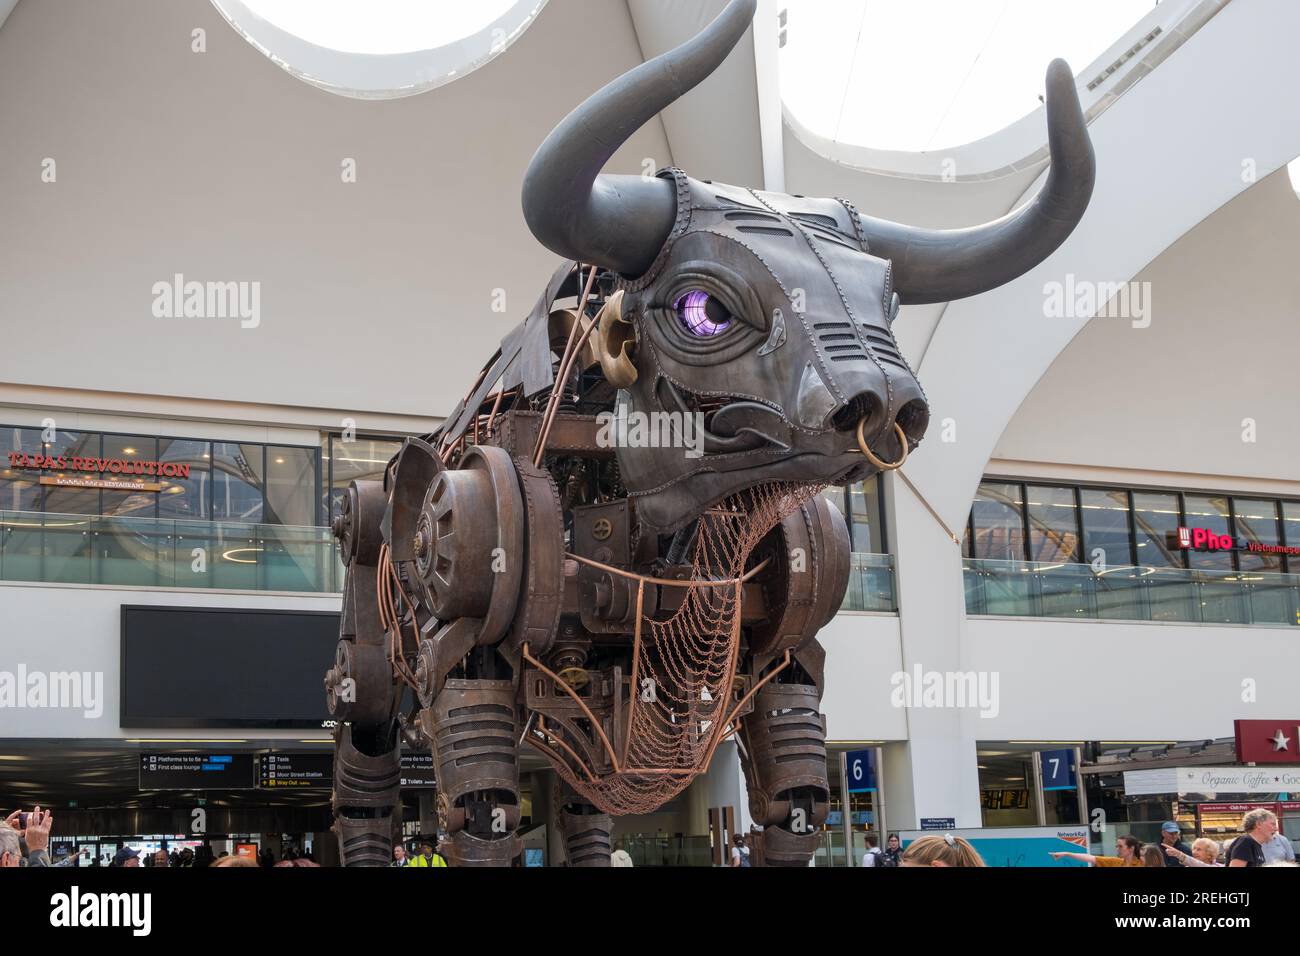 Ozzy the bull which was a feature of the Birmingham Commonwealth Games opening ceremony is now in the concourse at Birmingham New Street Station Stock Photo